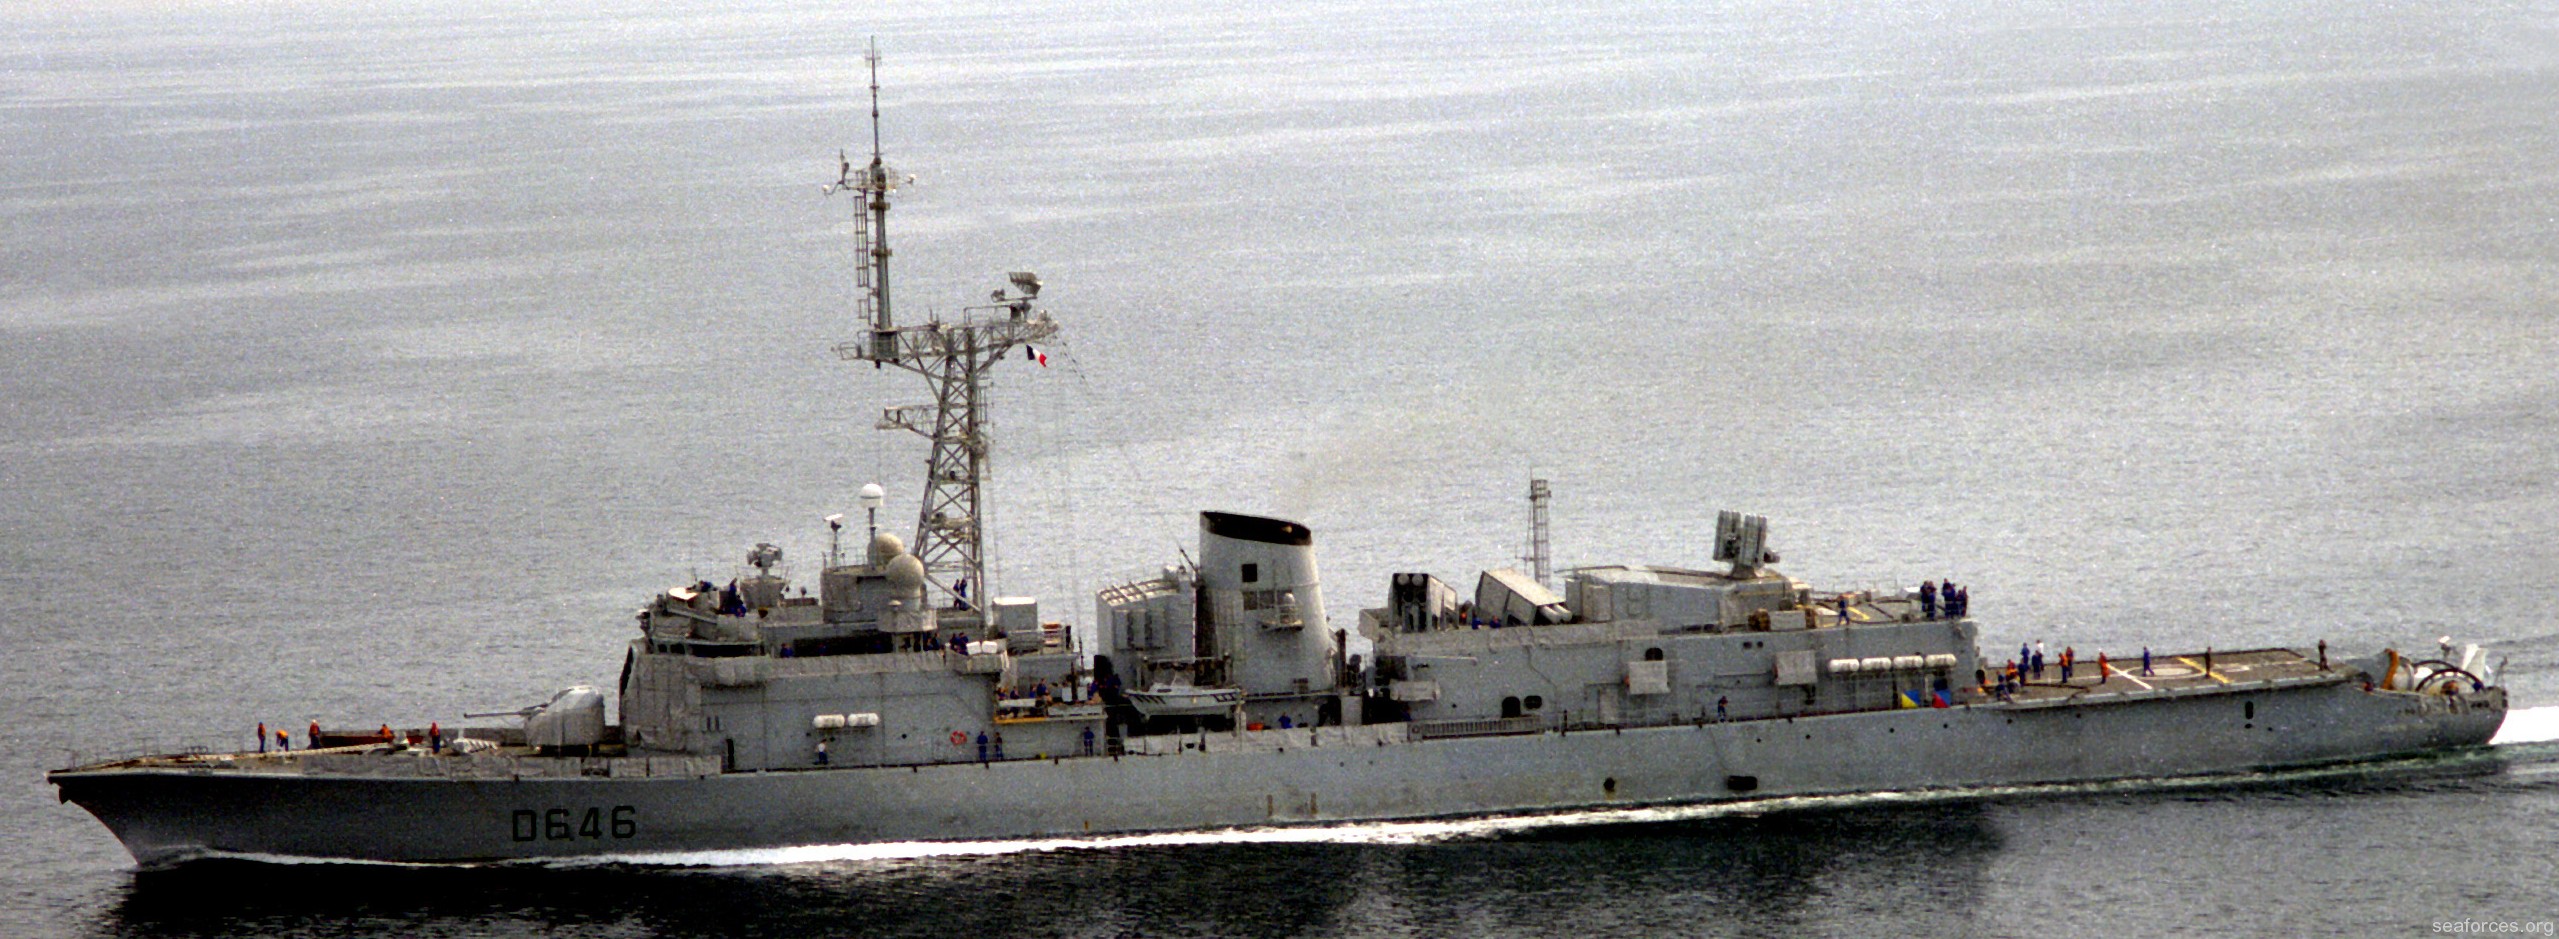 d-646 fs latouche treville f70as frigate destroyer asw french navy marine nationale 07